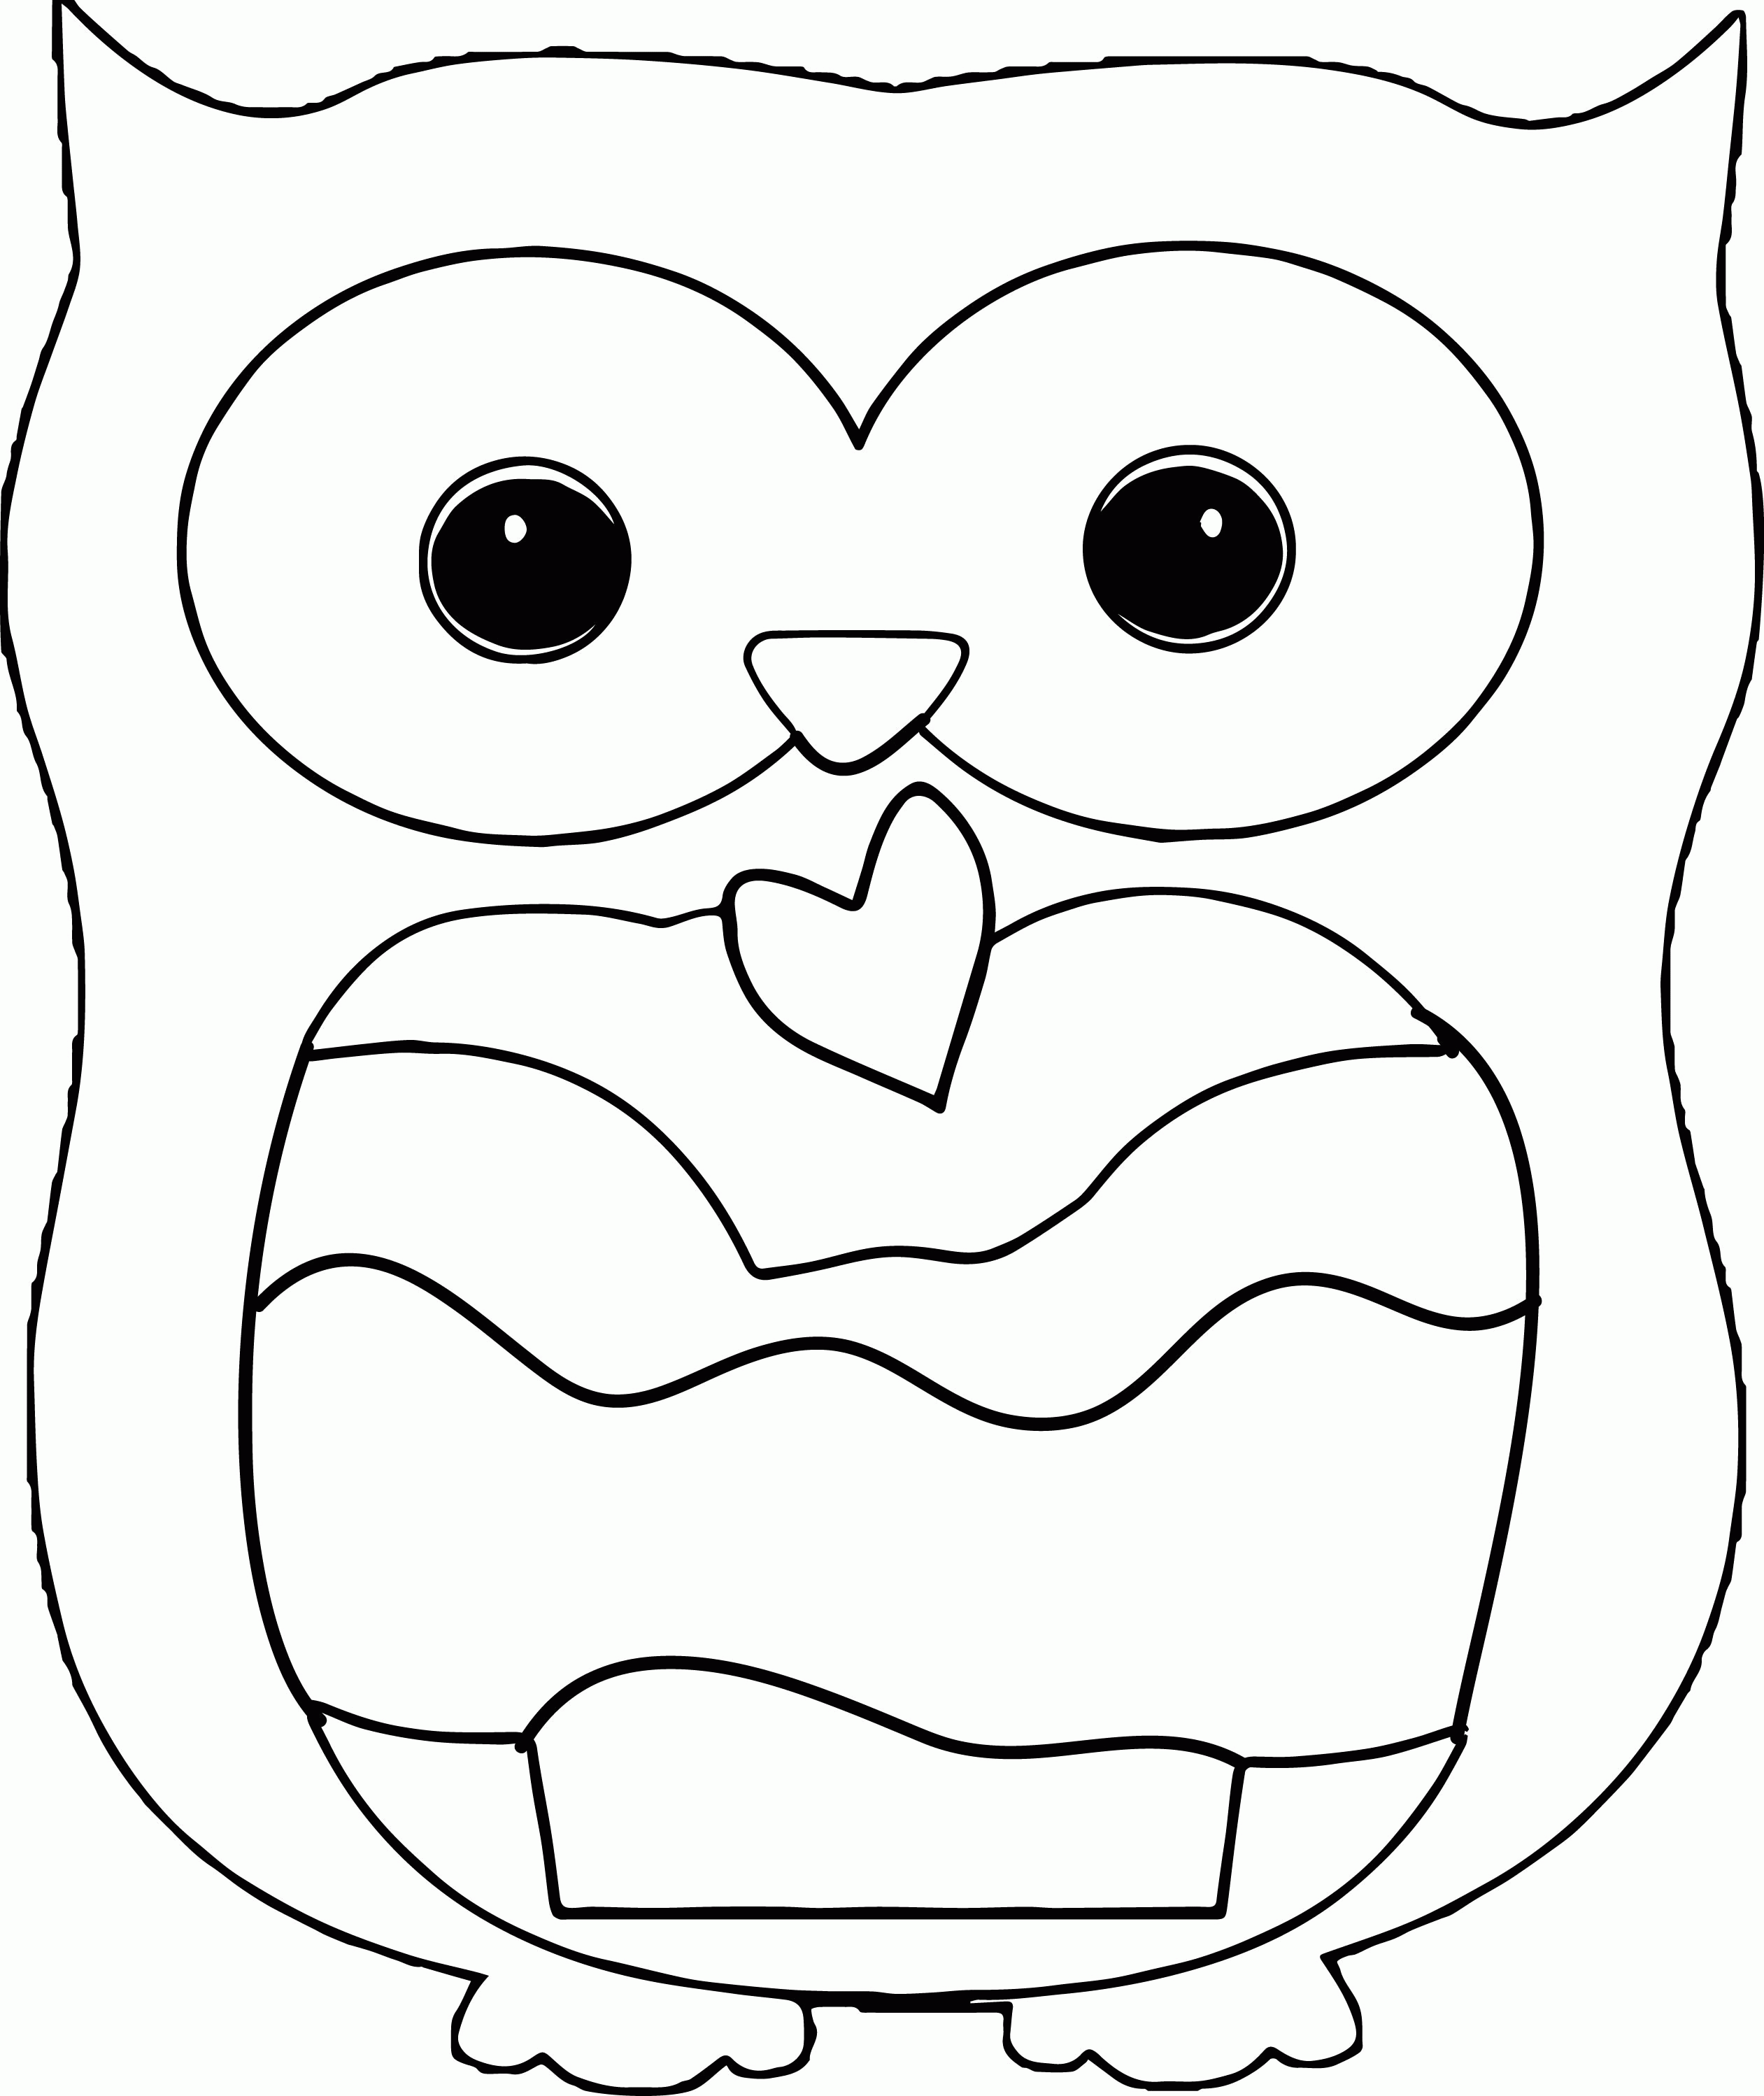 Coloring: Owl Eating A Cupcake Coloring Page